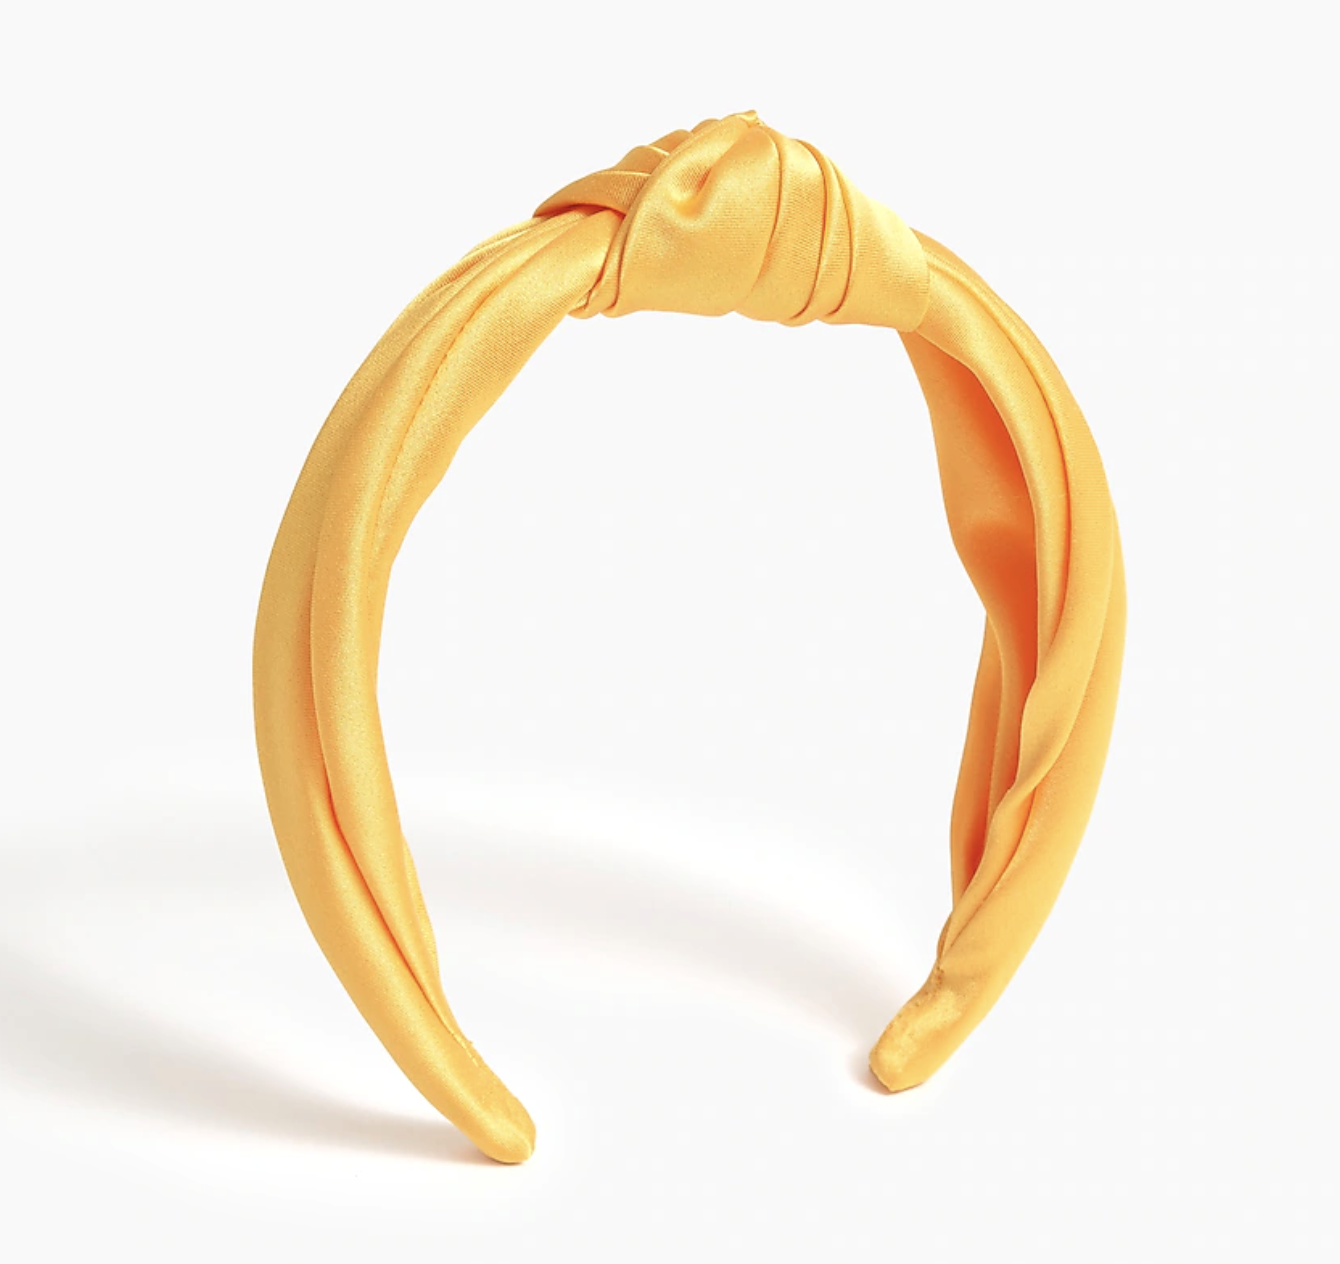 The headband in yellow against a plain background